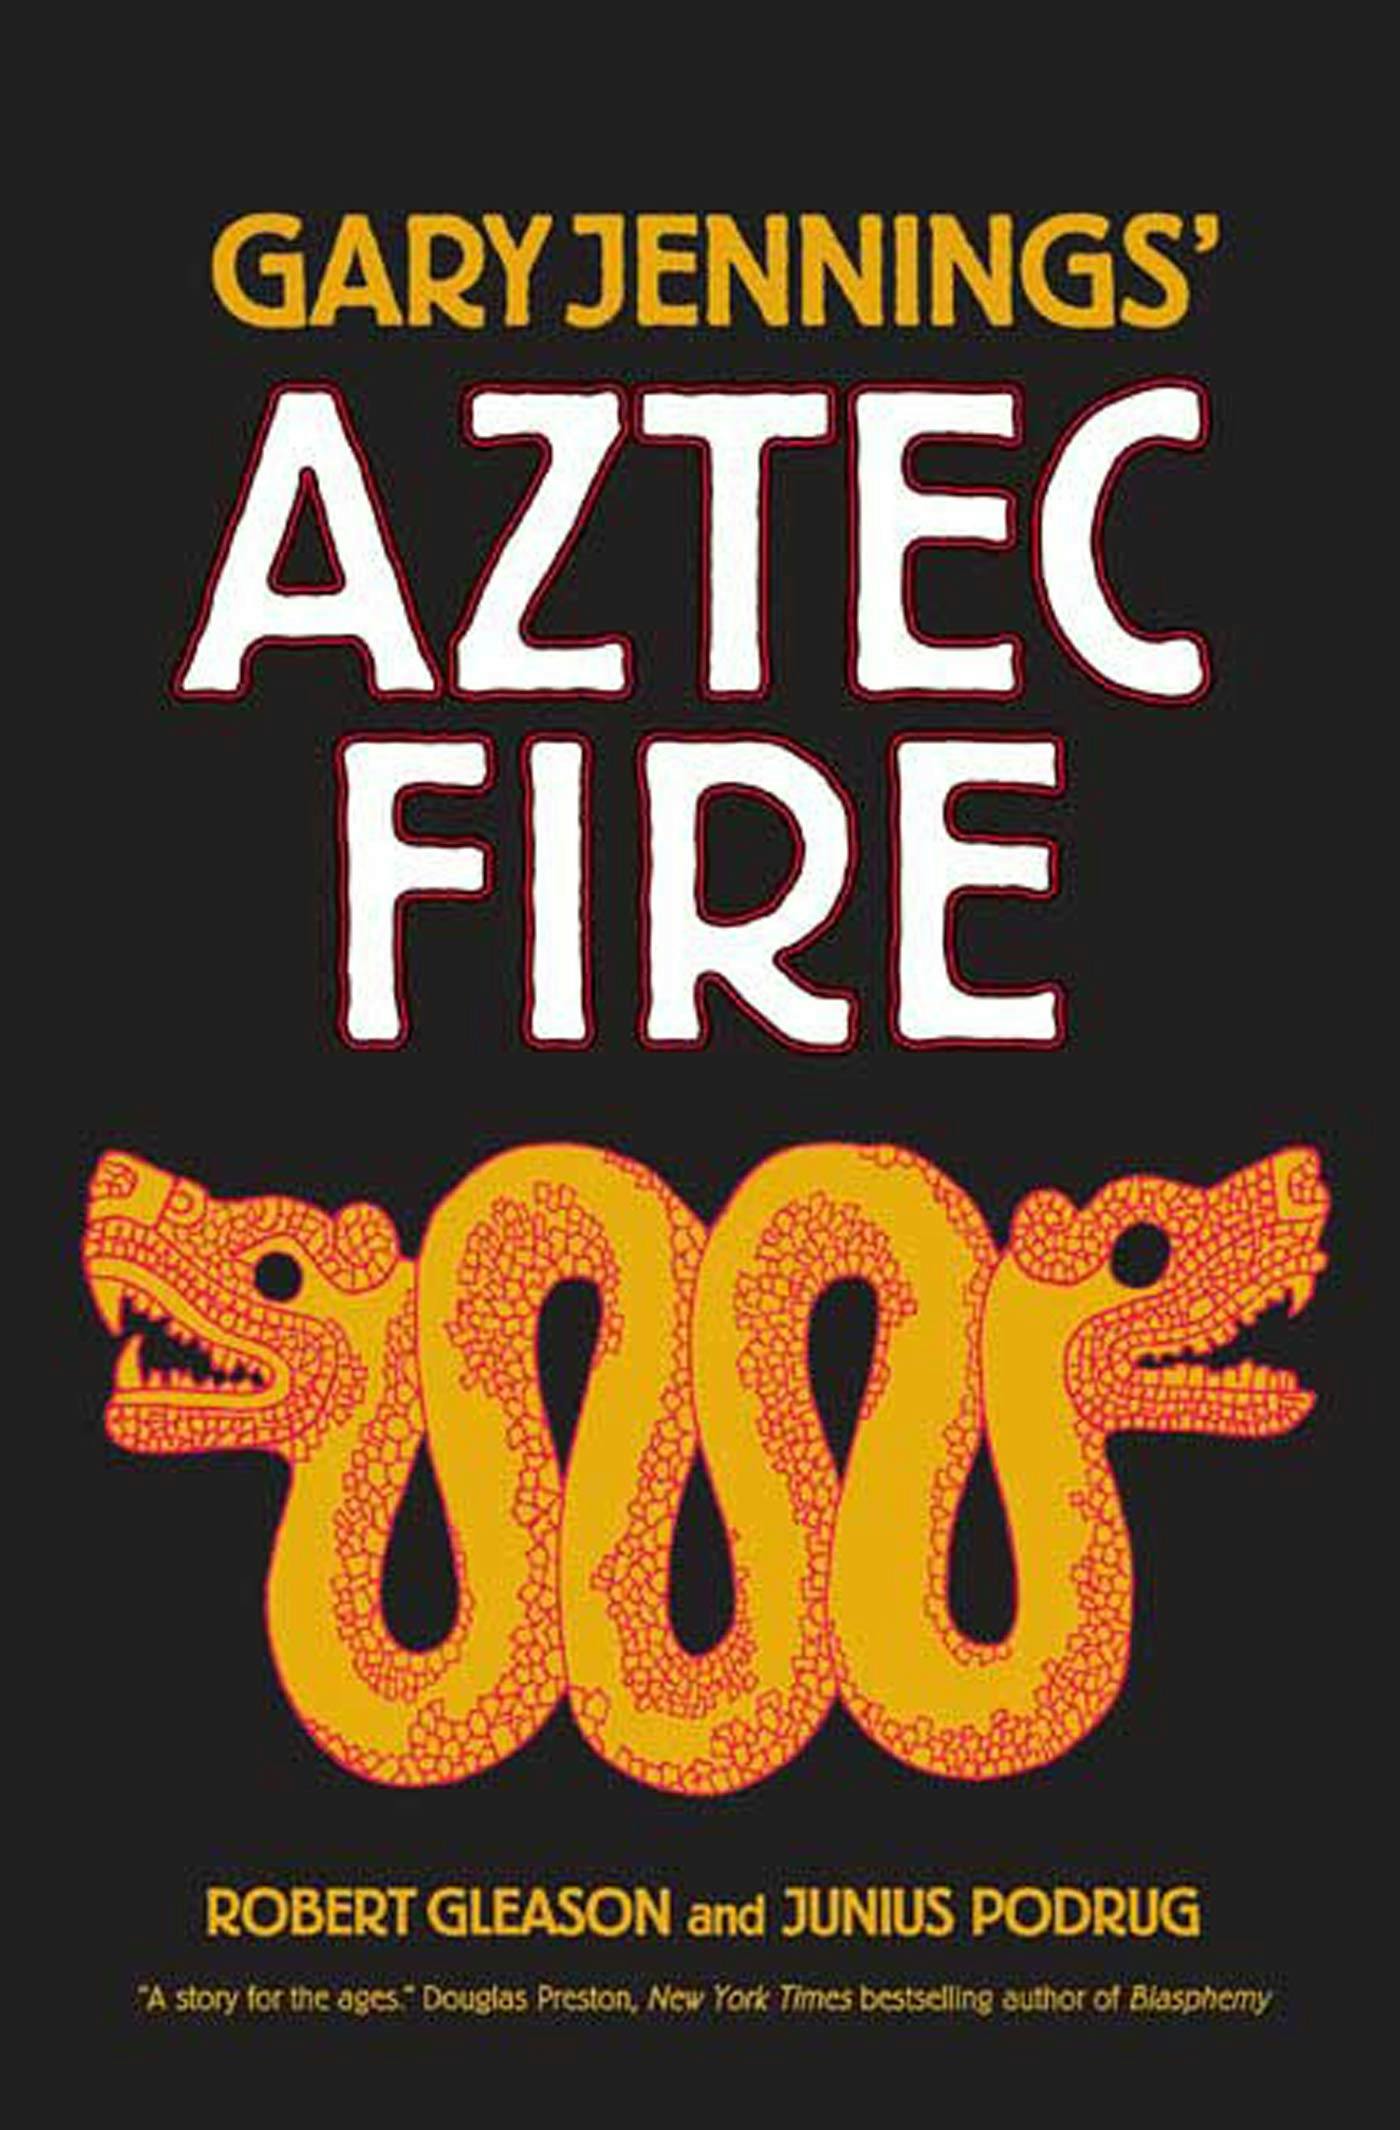 Cover for the book titled as: Aztec Fire